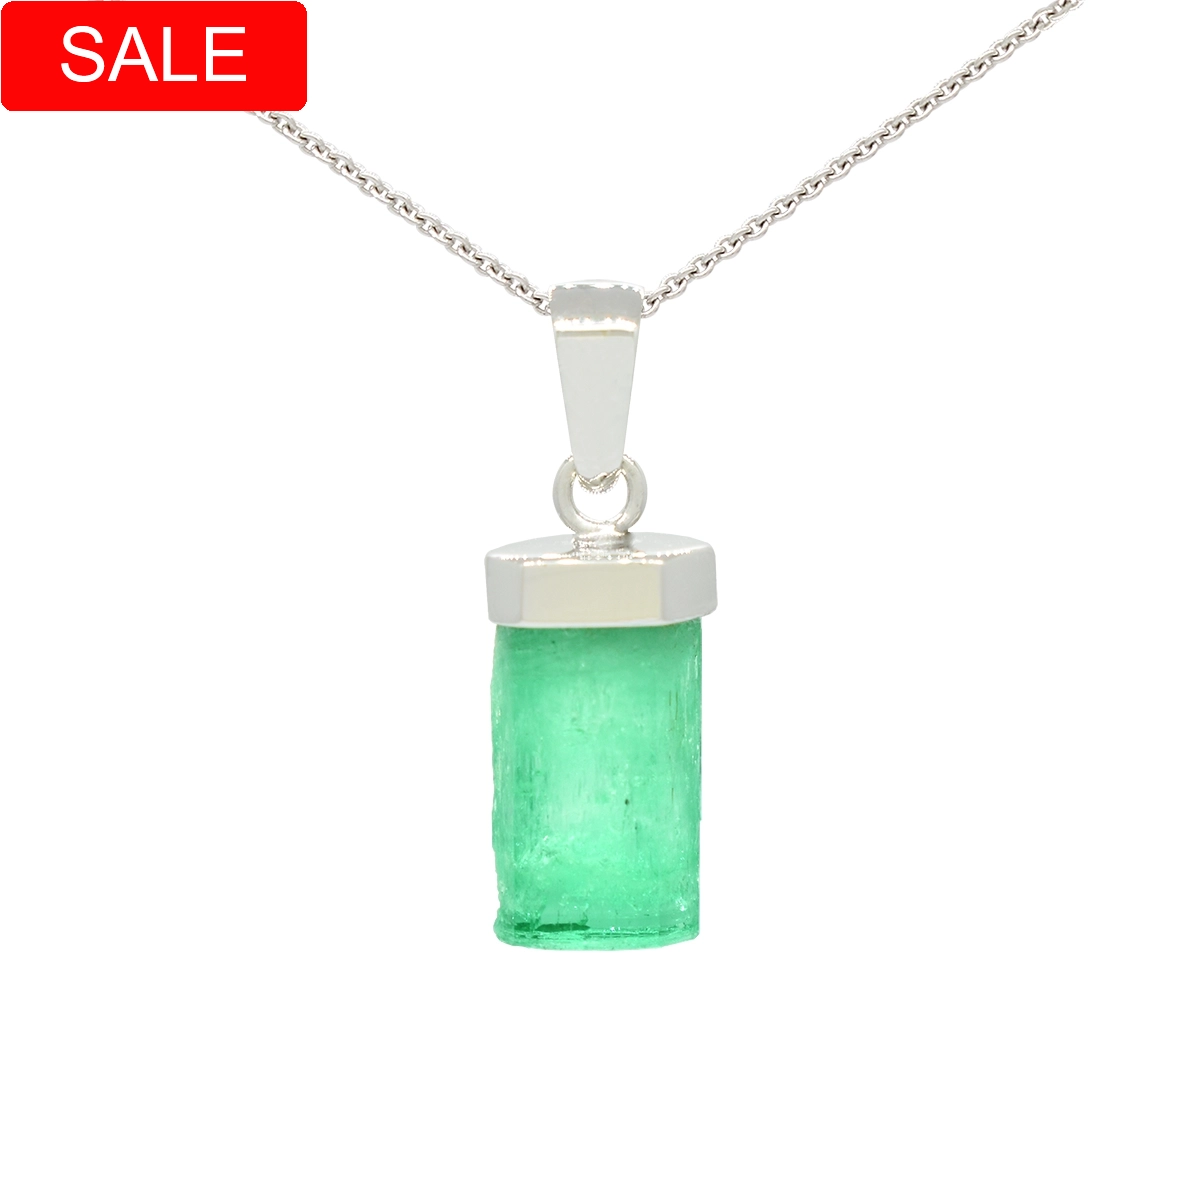 Emerald pendant Necklace with 5.66 carats uncut natural Colombian emerald set in 18K white gold solitaire style